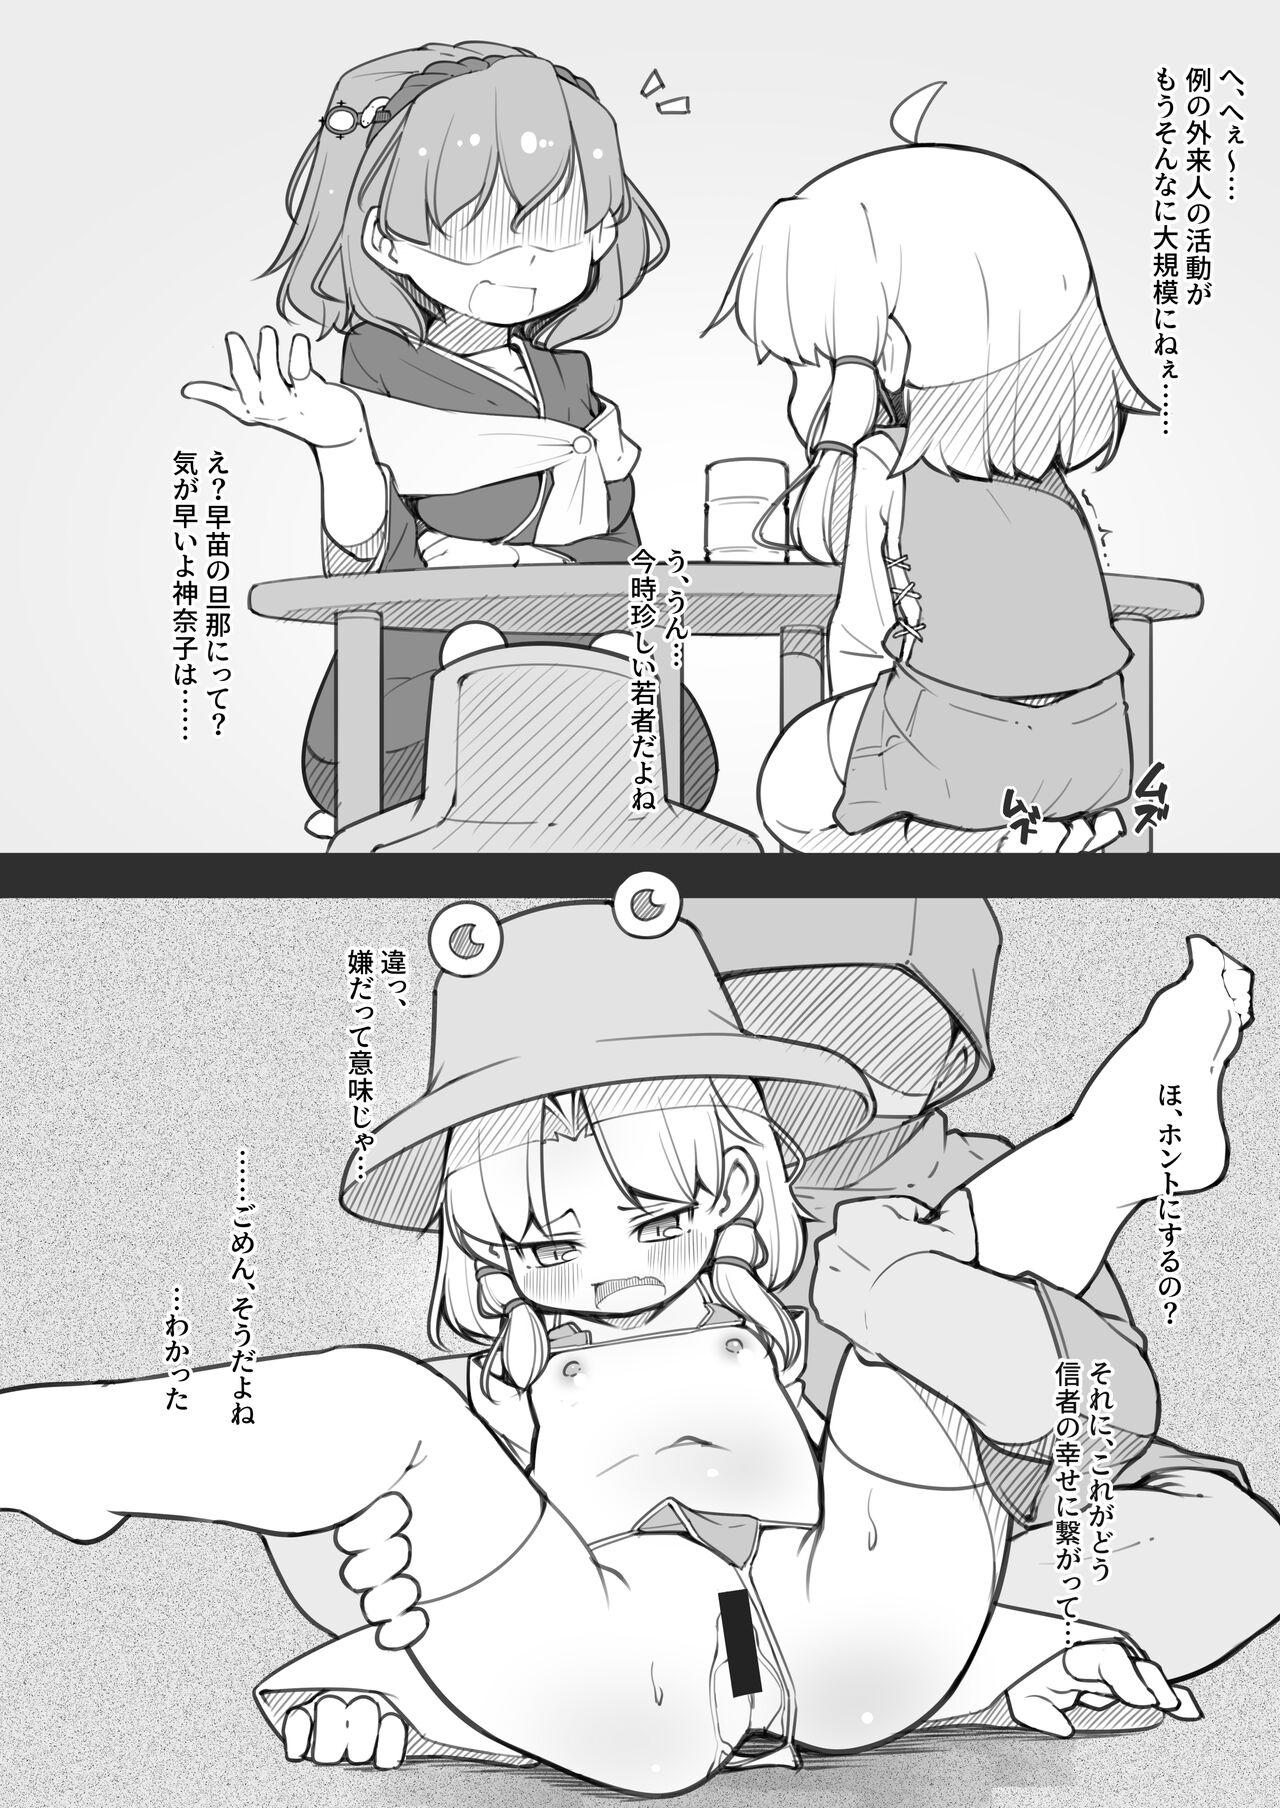 Sloppy Blowjob 幻想入りしたカリスマ教祖に諏訪子さまが祀り上げられる話 - Touhou project Off - Page 11